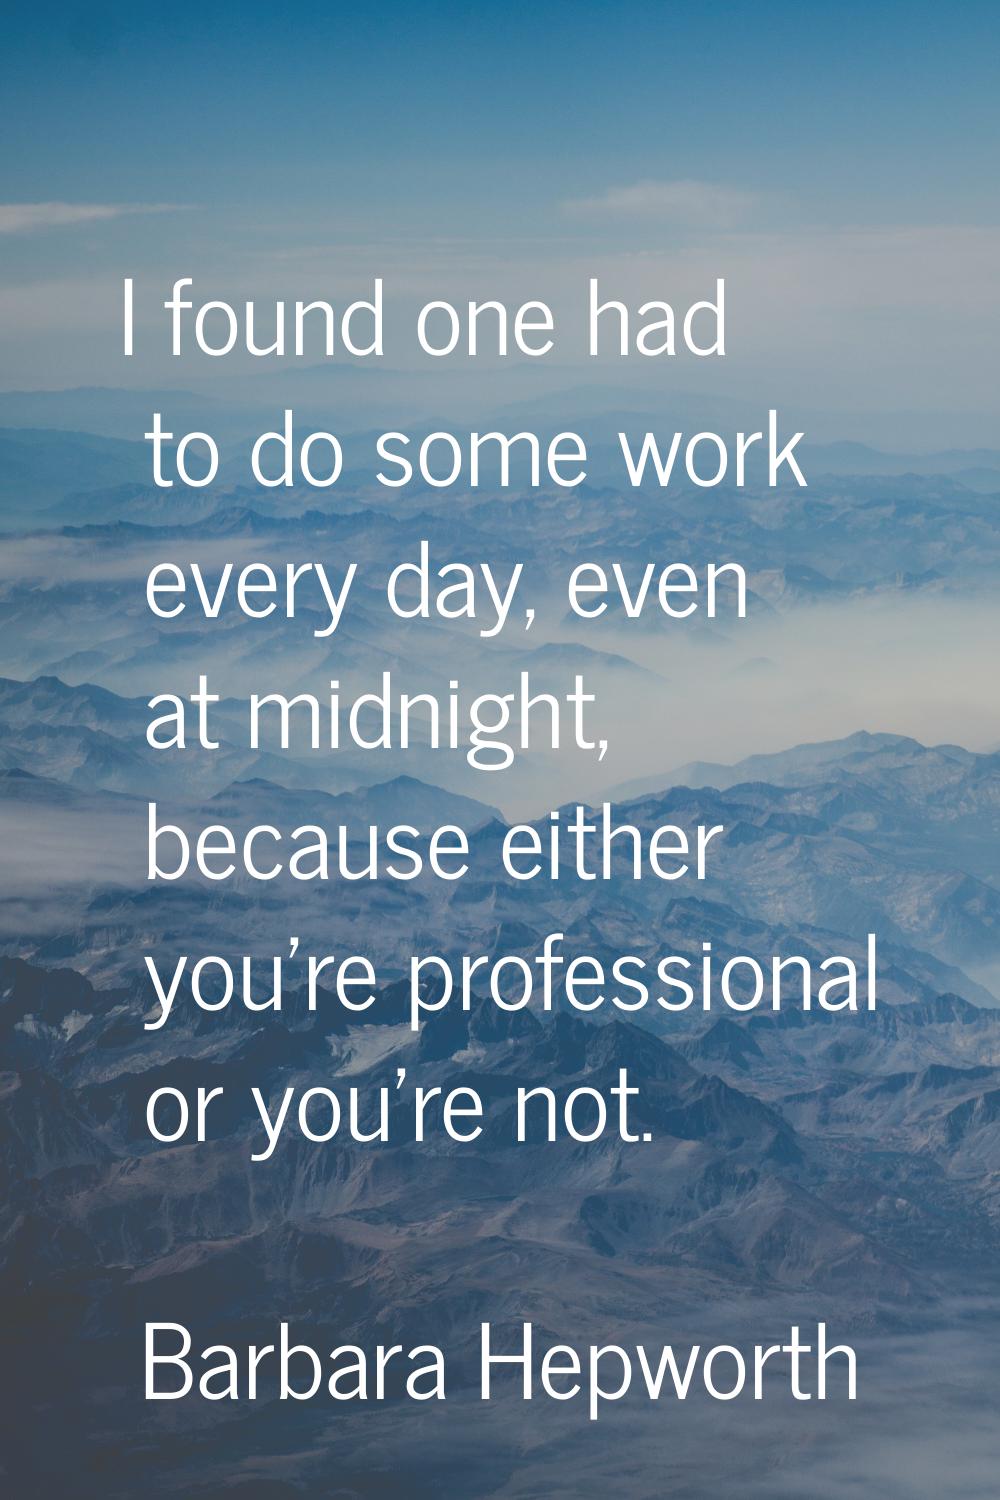 I found one had to do some work every day, even at midnight, because either you're professional or 